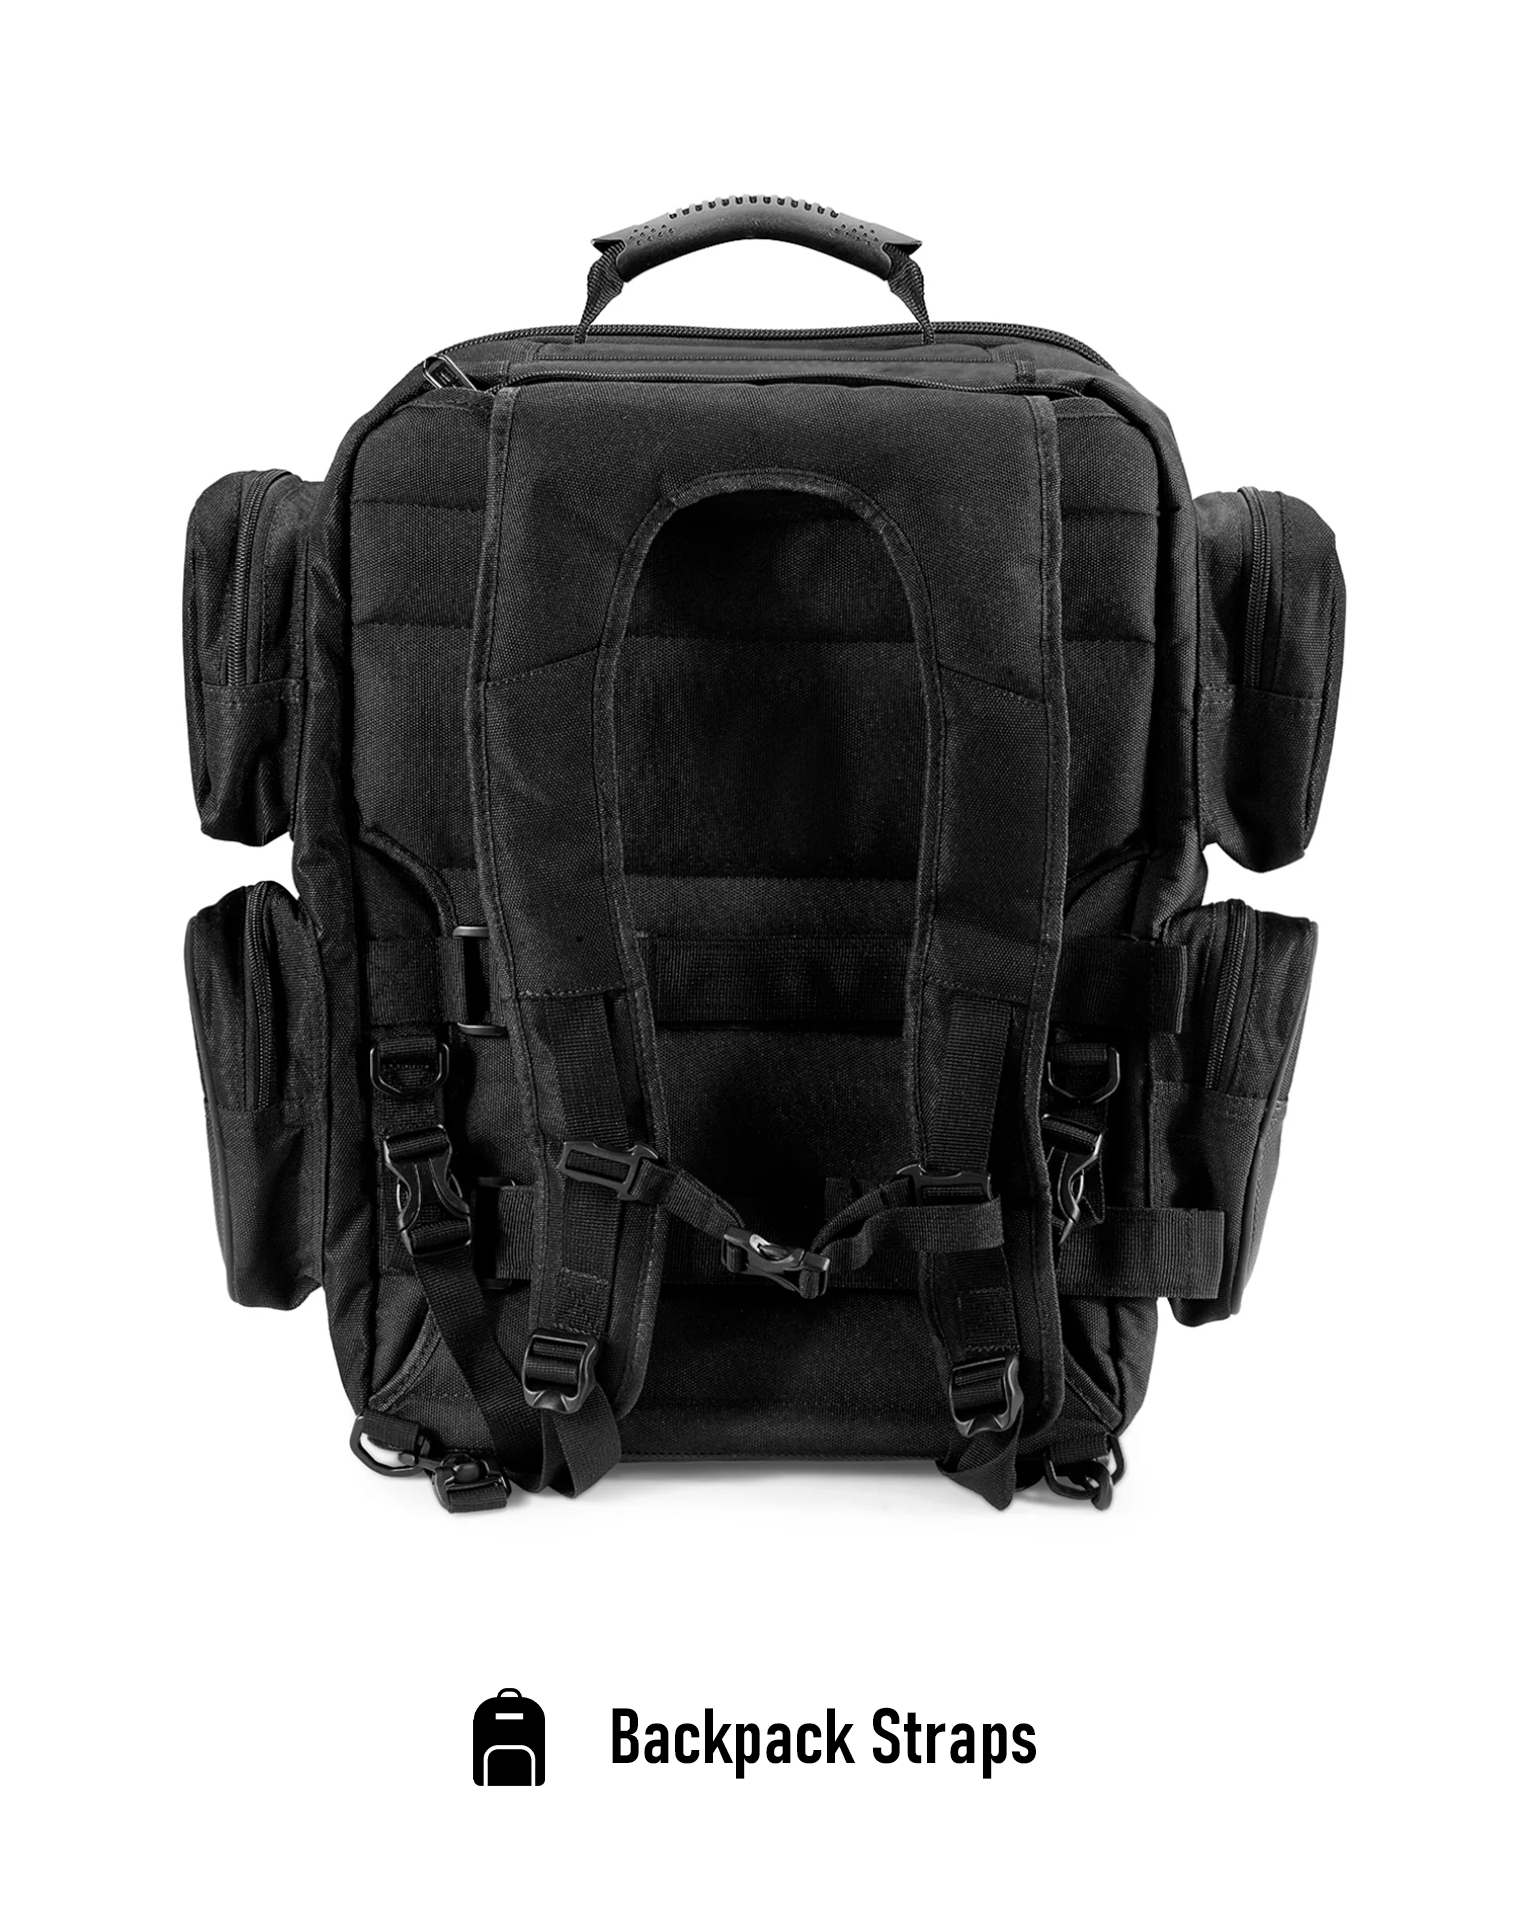 30L - Voyage Large Hyosung Motorcycle Backpack